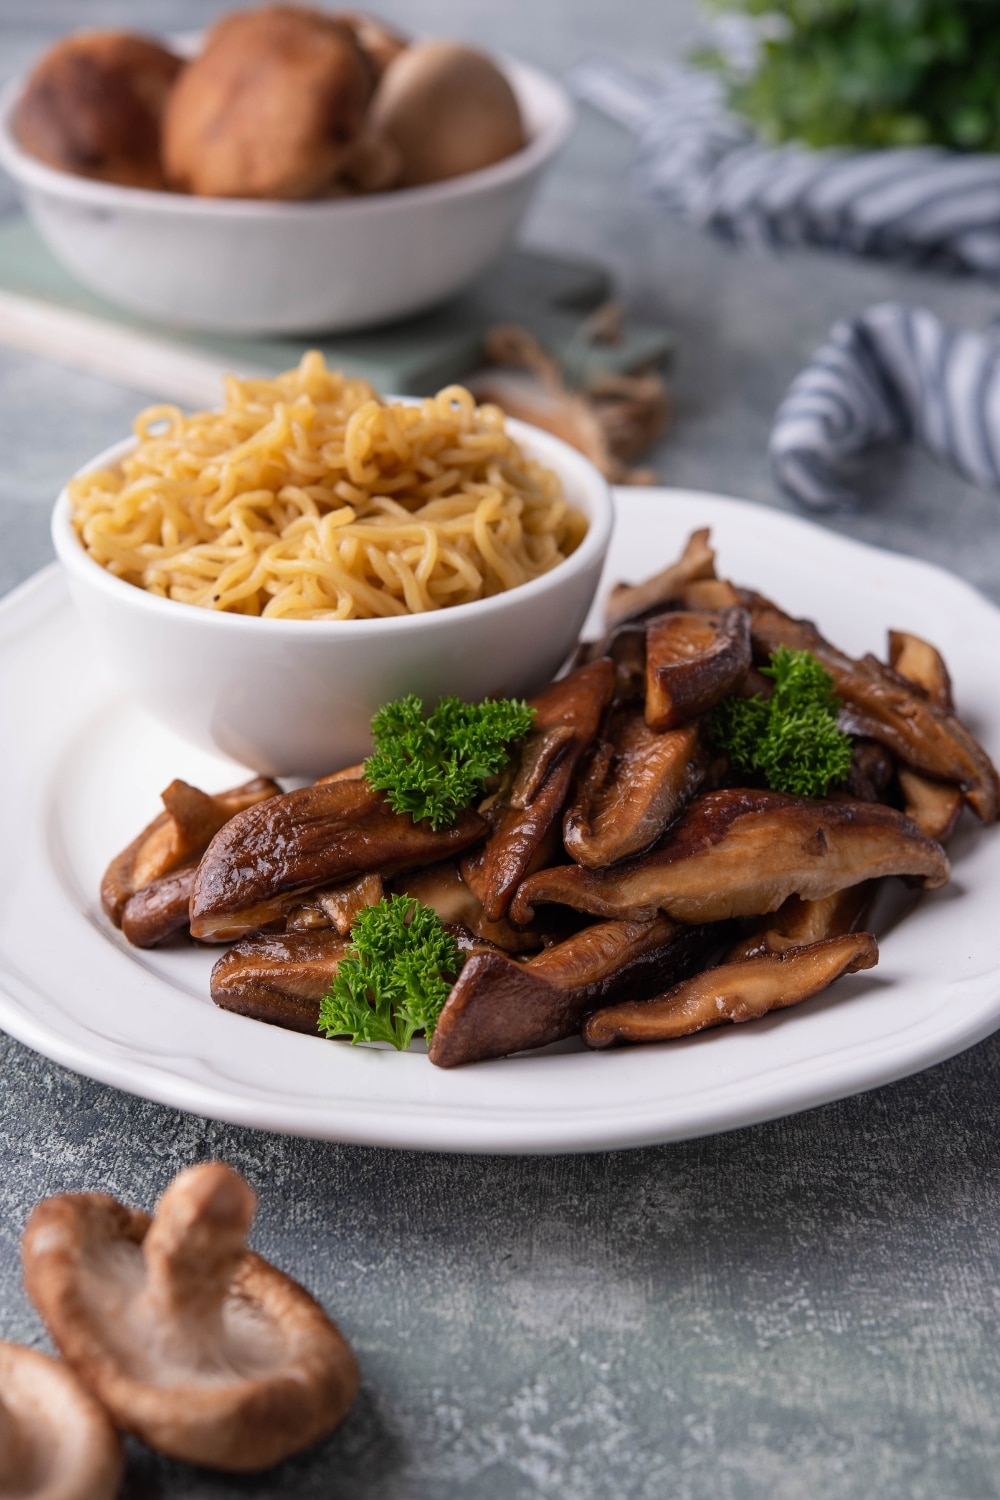 Sauteed shiitake mushrooms garnished with parsley on a white plate next to a small bowl of noodles. In the back is a bowl of raw shiitake mushrooms.